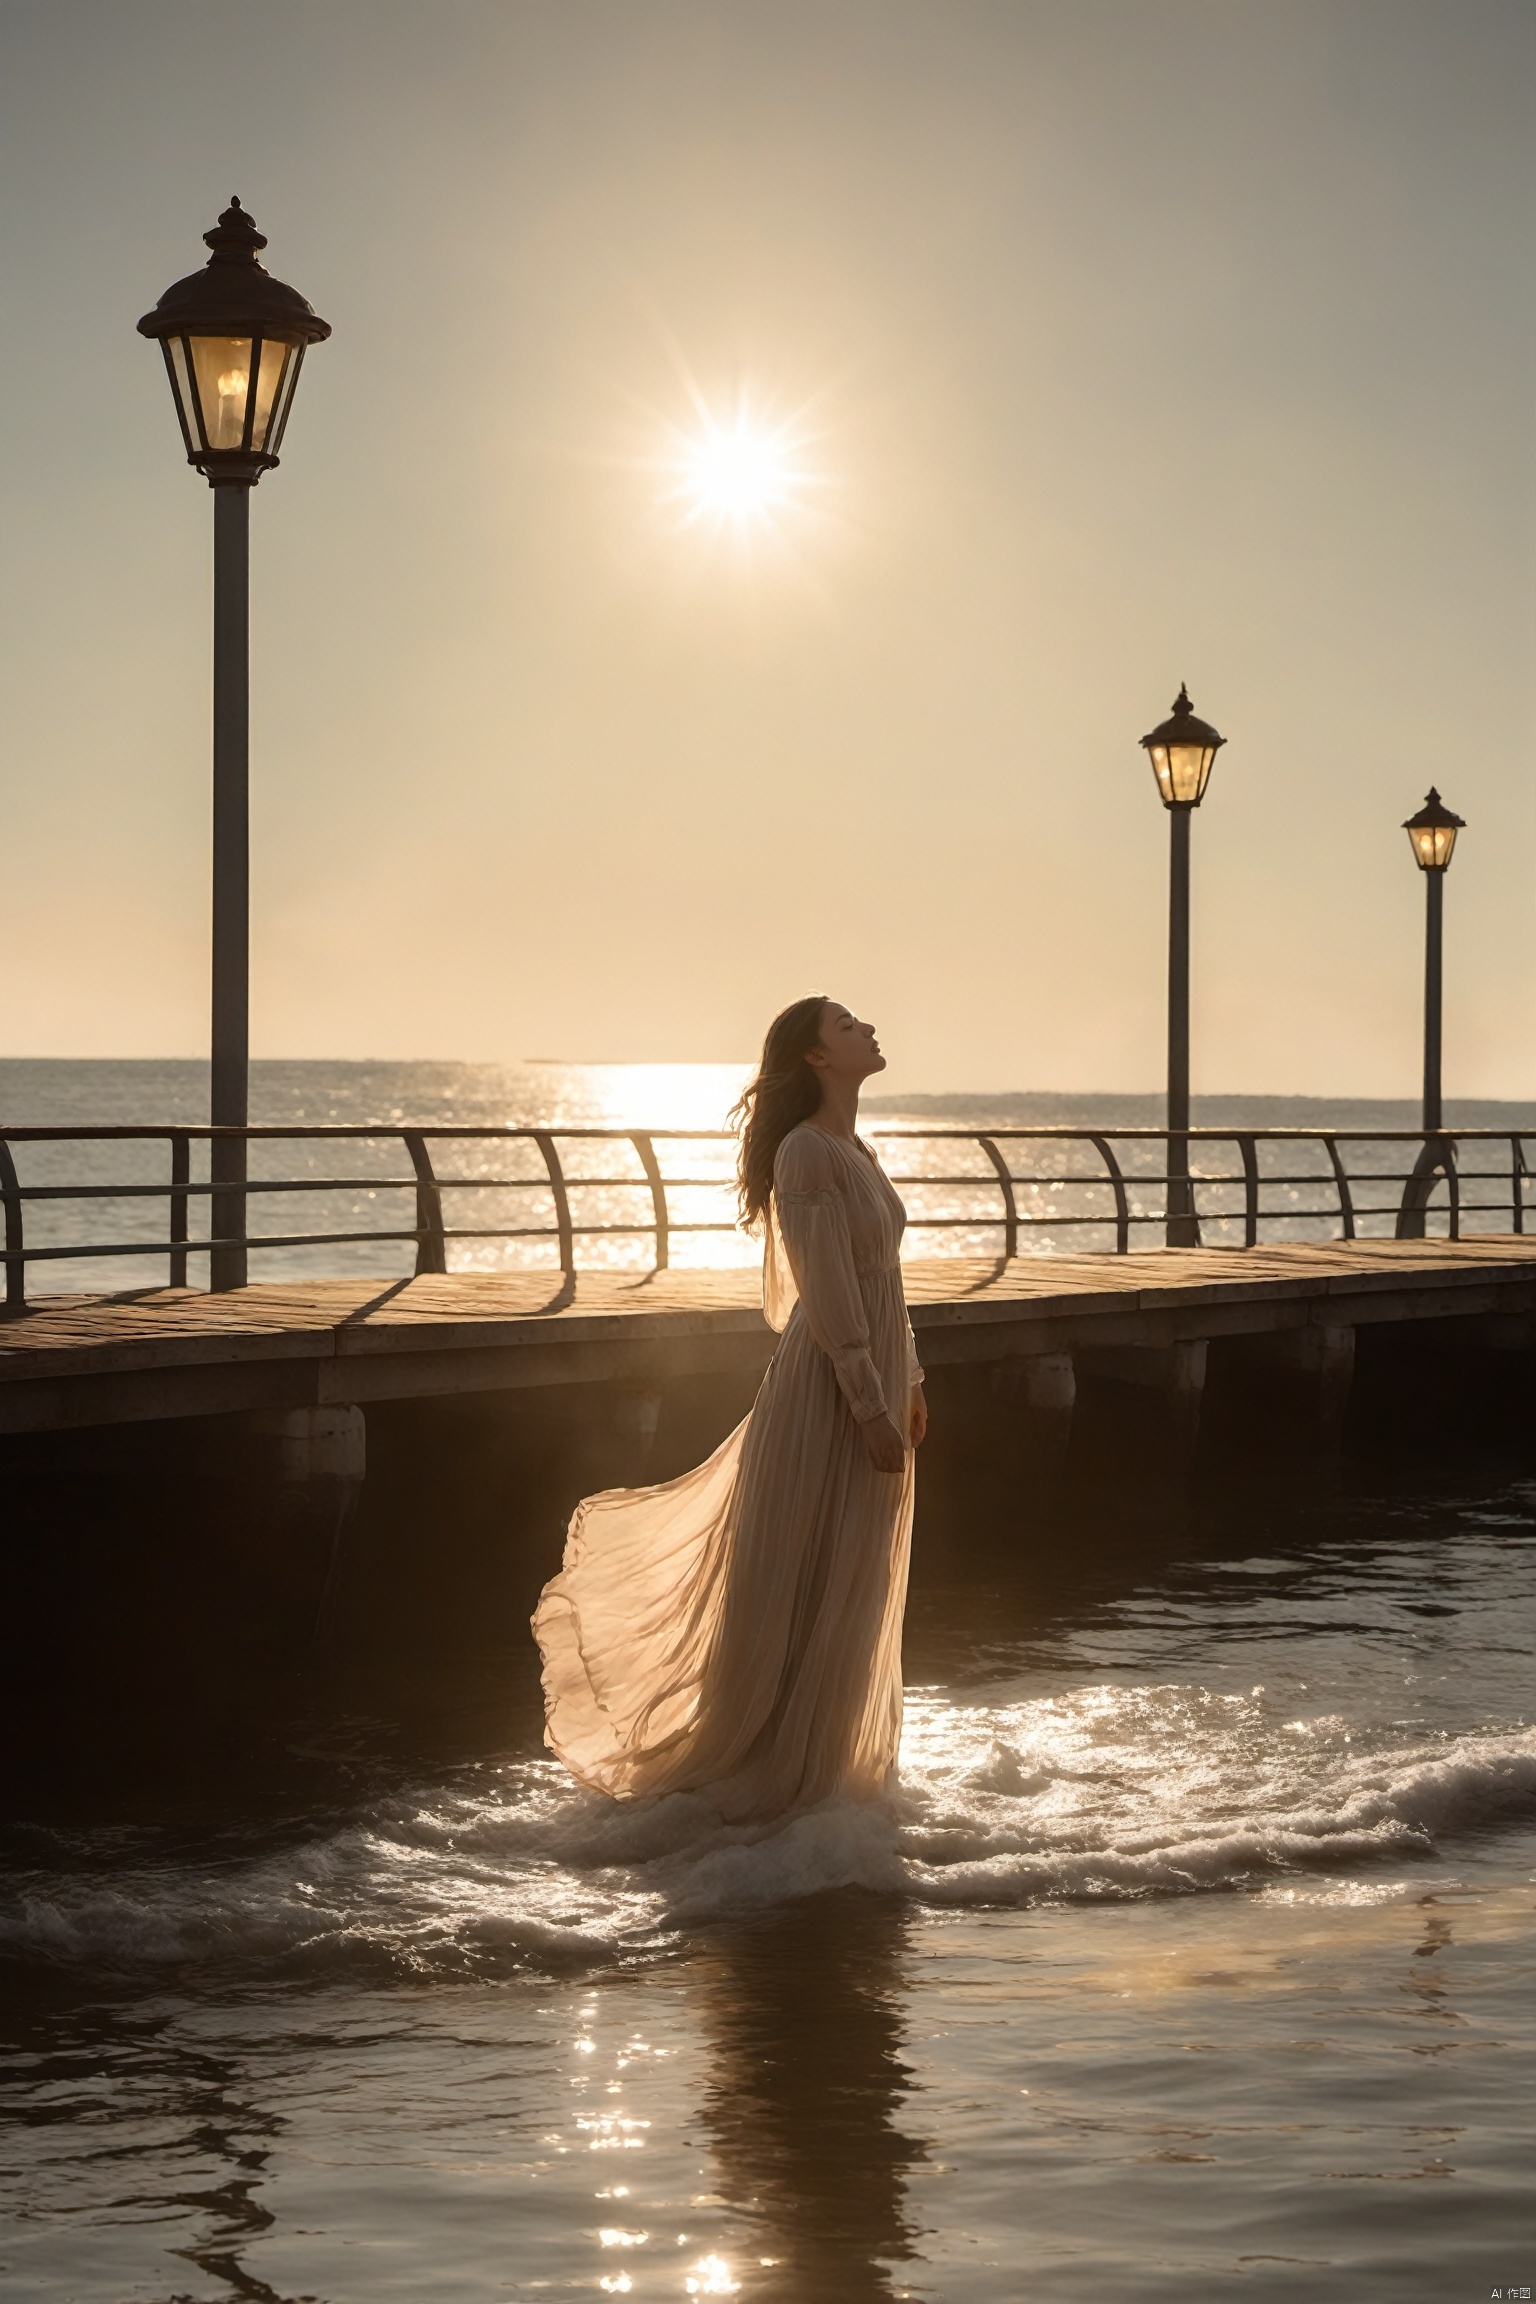 A woman in a flowing dress stands on a pier, her eyes closed as she feels the warm breeze off the water. The sun's rays create a halo around her, and the light dances on the waves, creating a mesmerizing scene of tranquility.